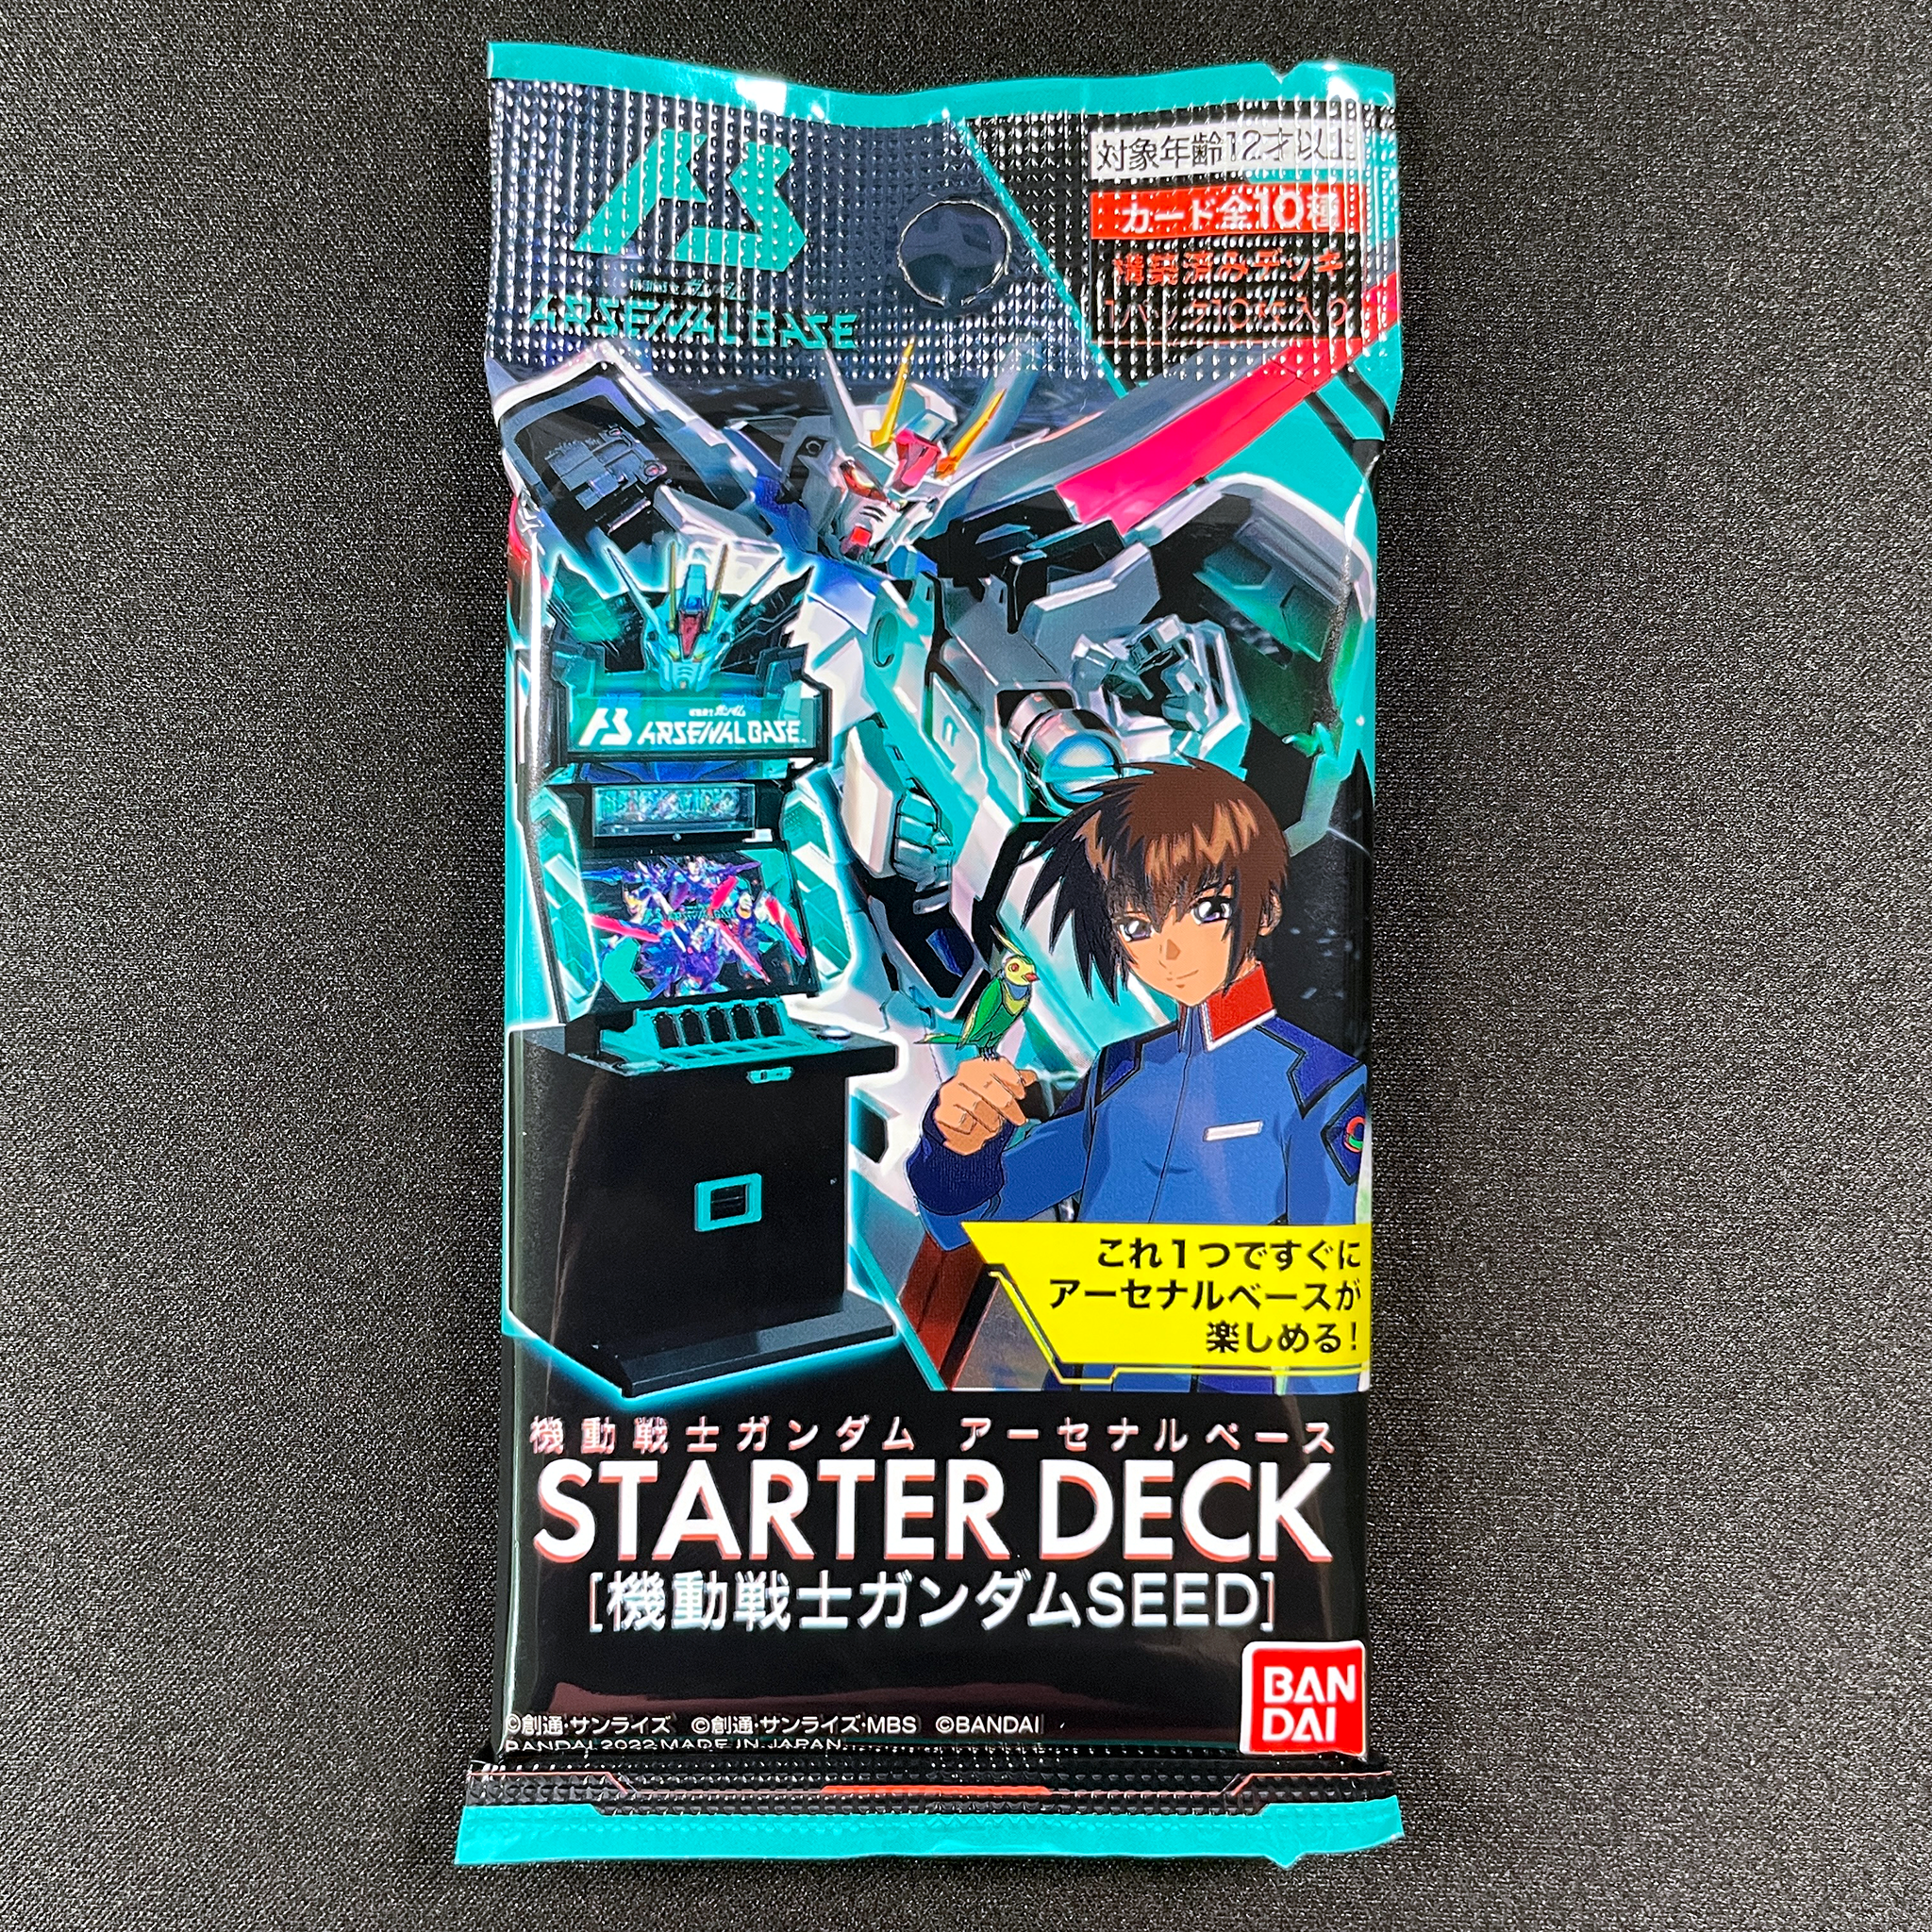 MOBILE SUIT GUNDAM ARSENAL BASE STARTER DECK [MOBILE SUITE GUNDAM SEED]  Release date: February 24 2022  Contain 10 cards ST01-001 ~ ST01-010